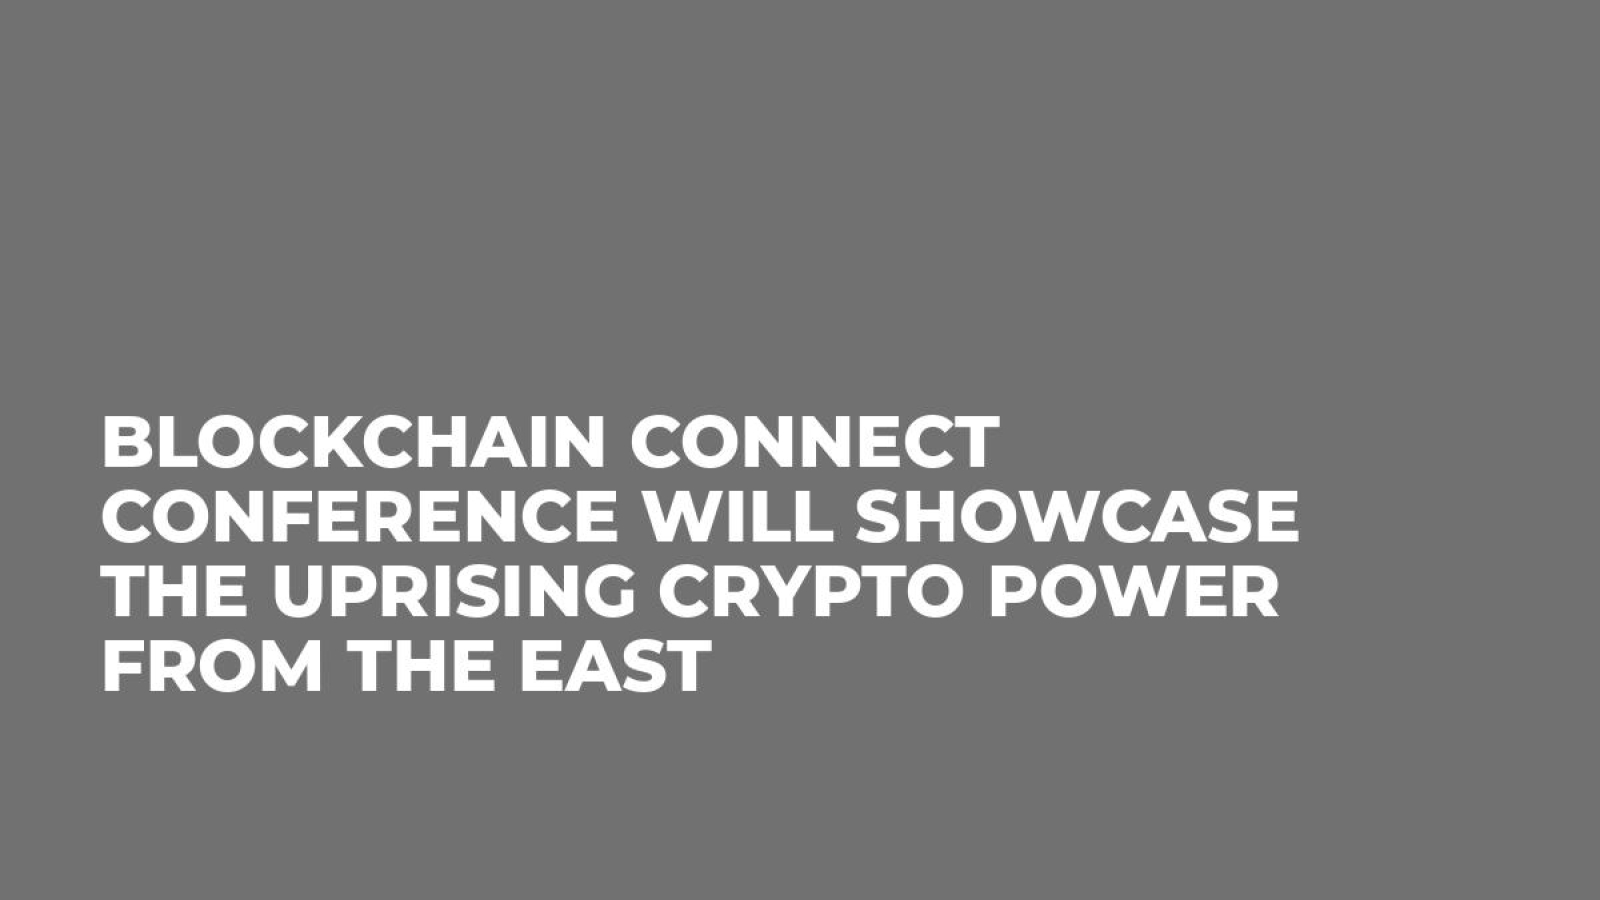 Blockchain Connect Conference Will Showcase the Uprising Crypto Power From the East